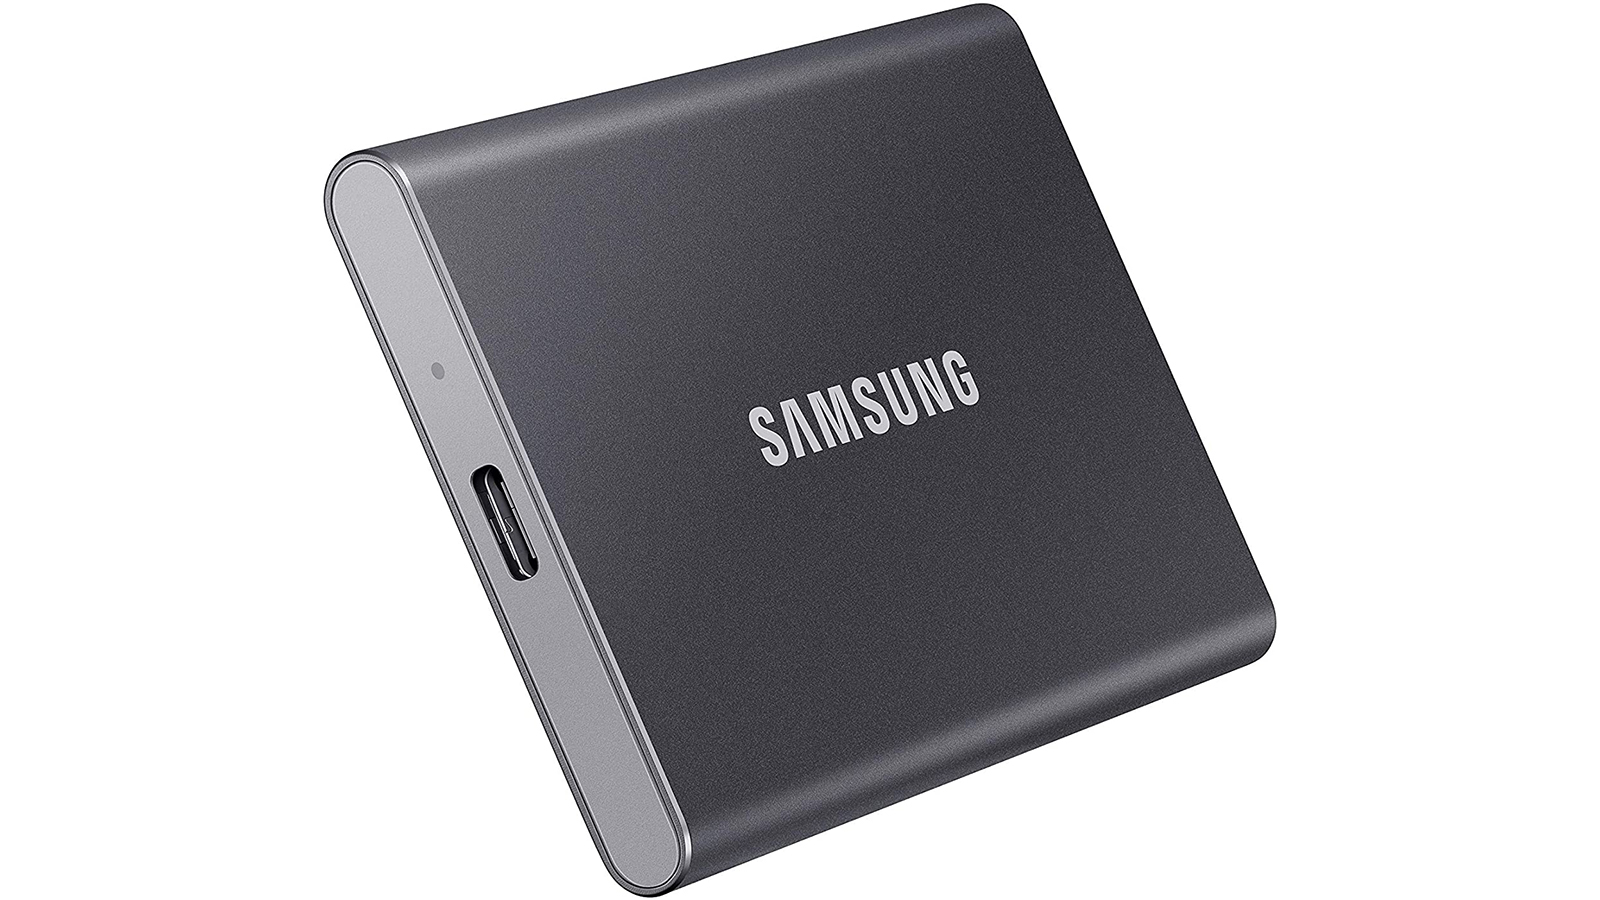 Samsung T7 SSD review: a super-fast, go-anywhere external hard